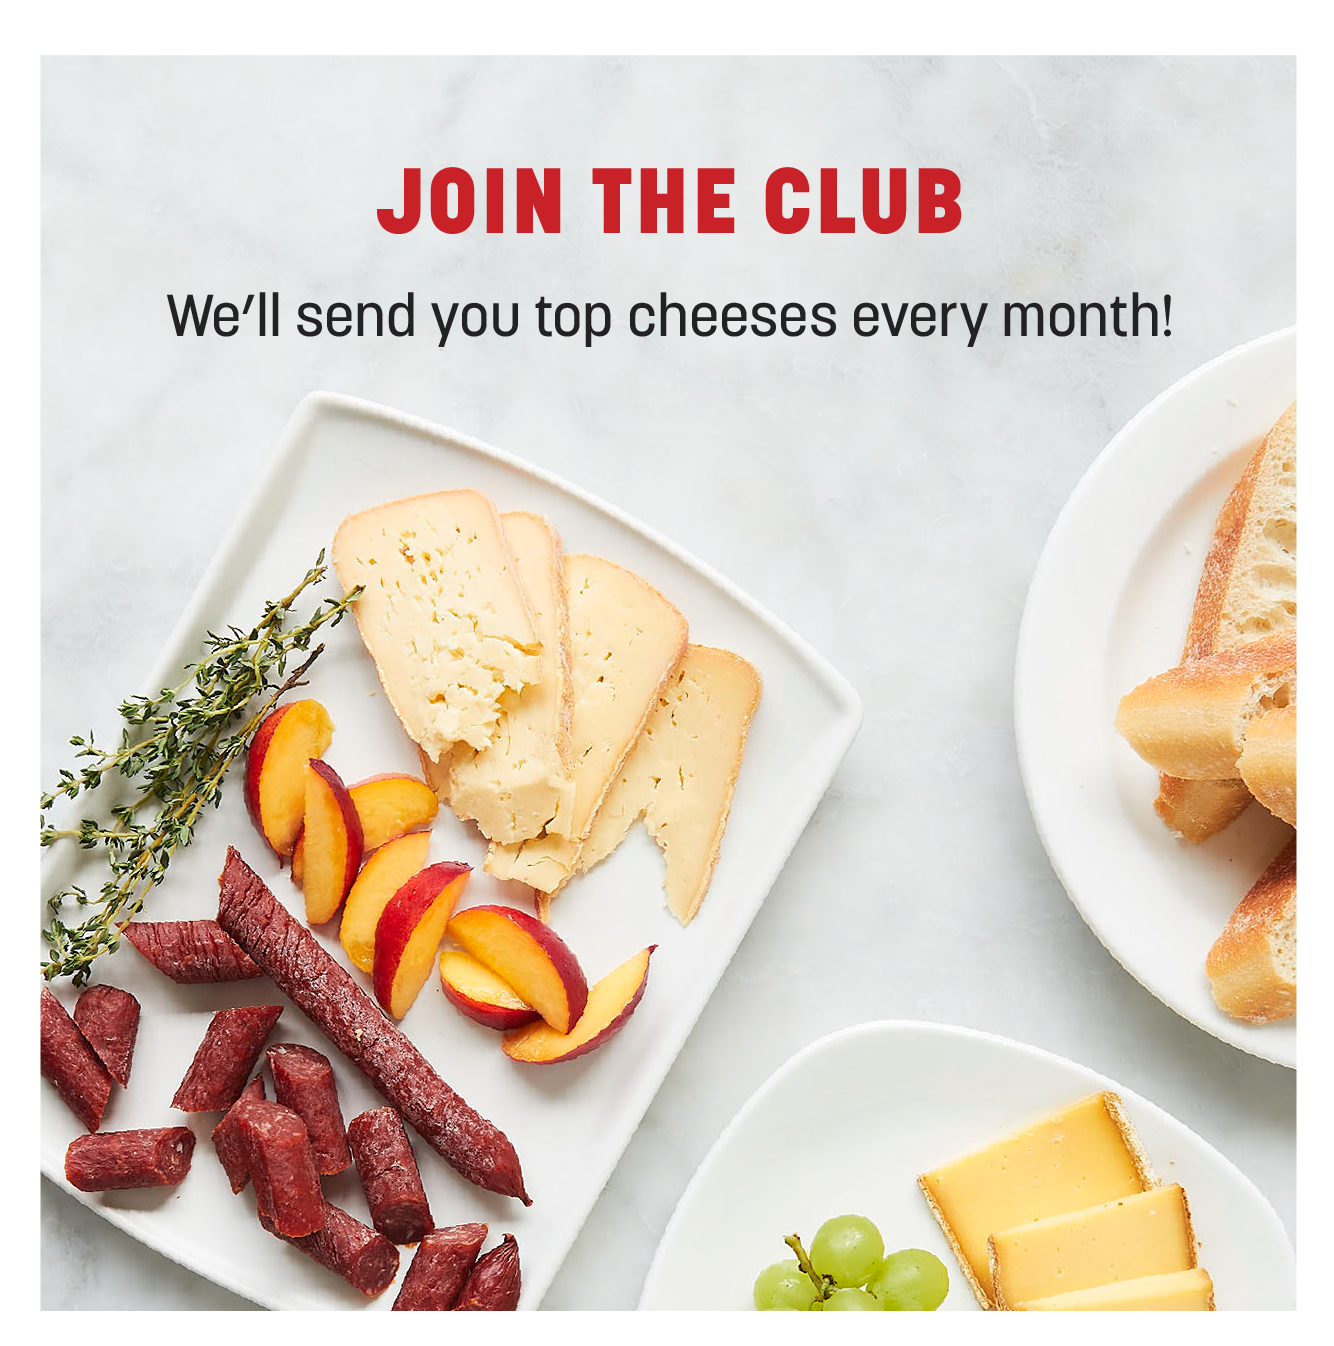 JOIN THE CLUB Well send you top cheeses every month! 